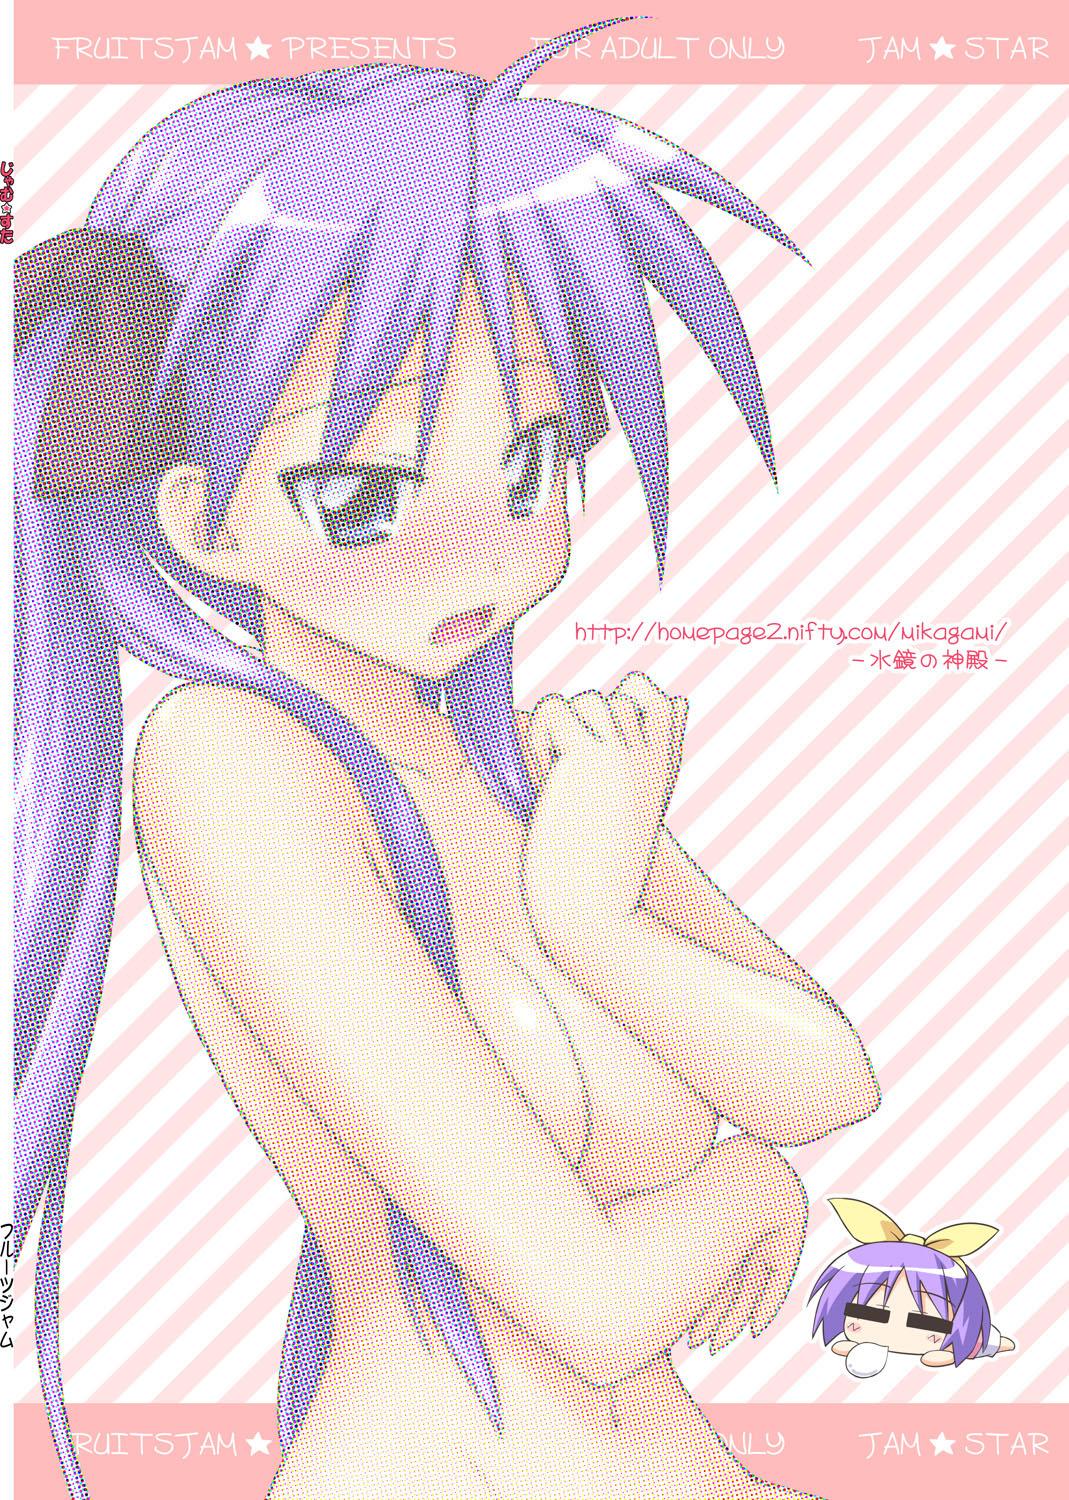 Dad Jam Star - Lucky star Free Blow Job - Page 26